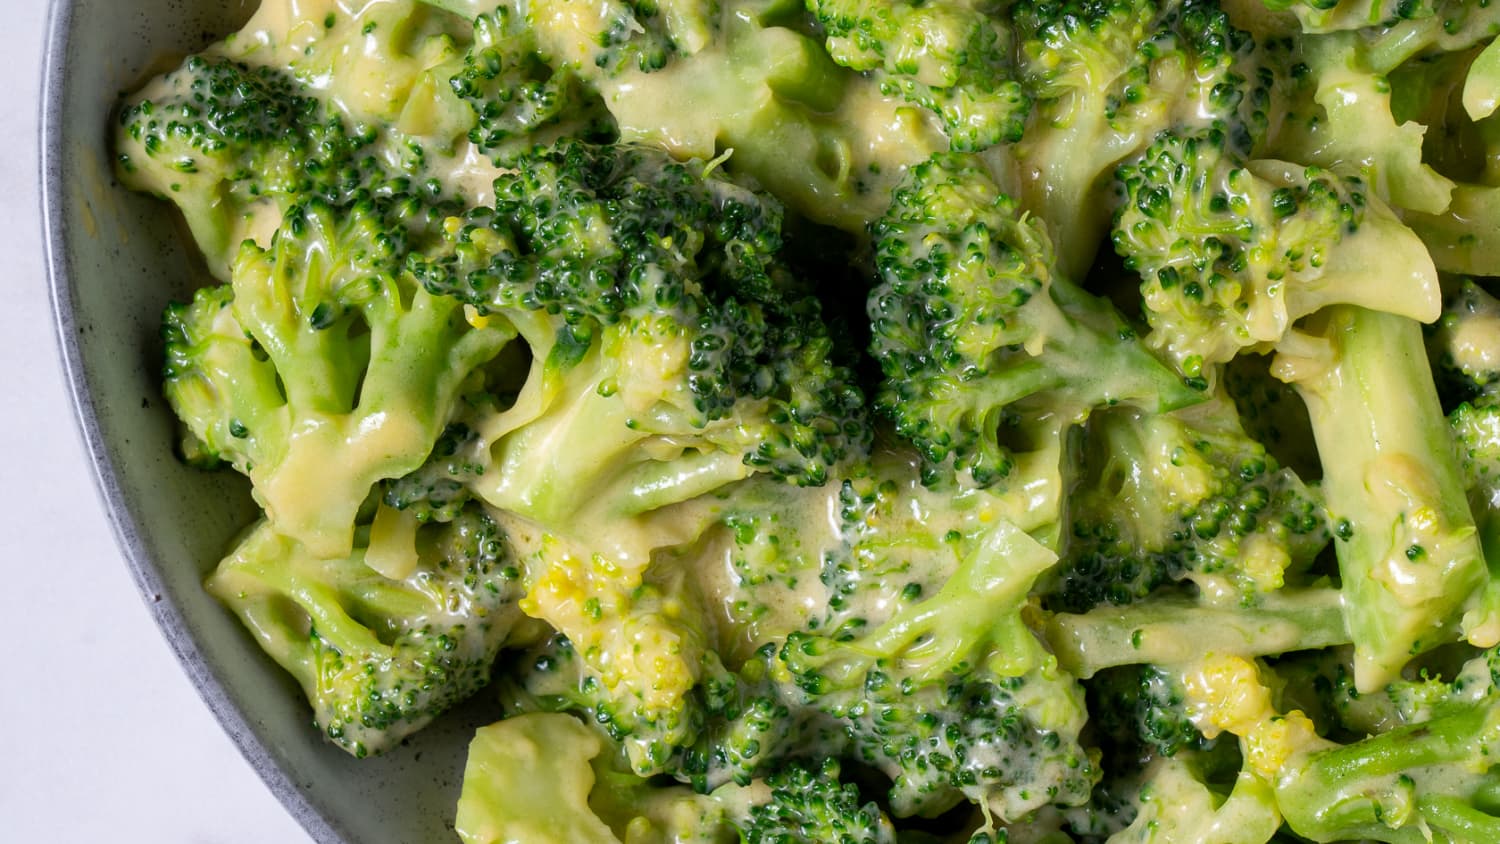 Broccoli and cheddar dishes